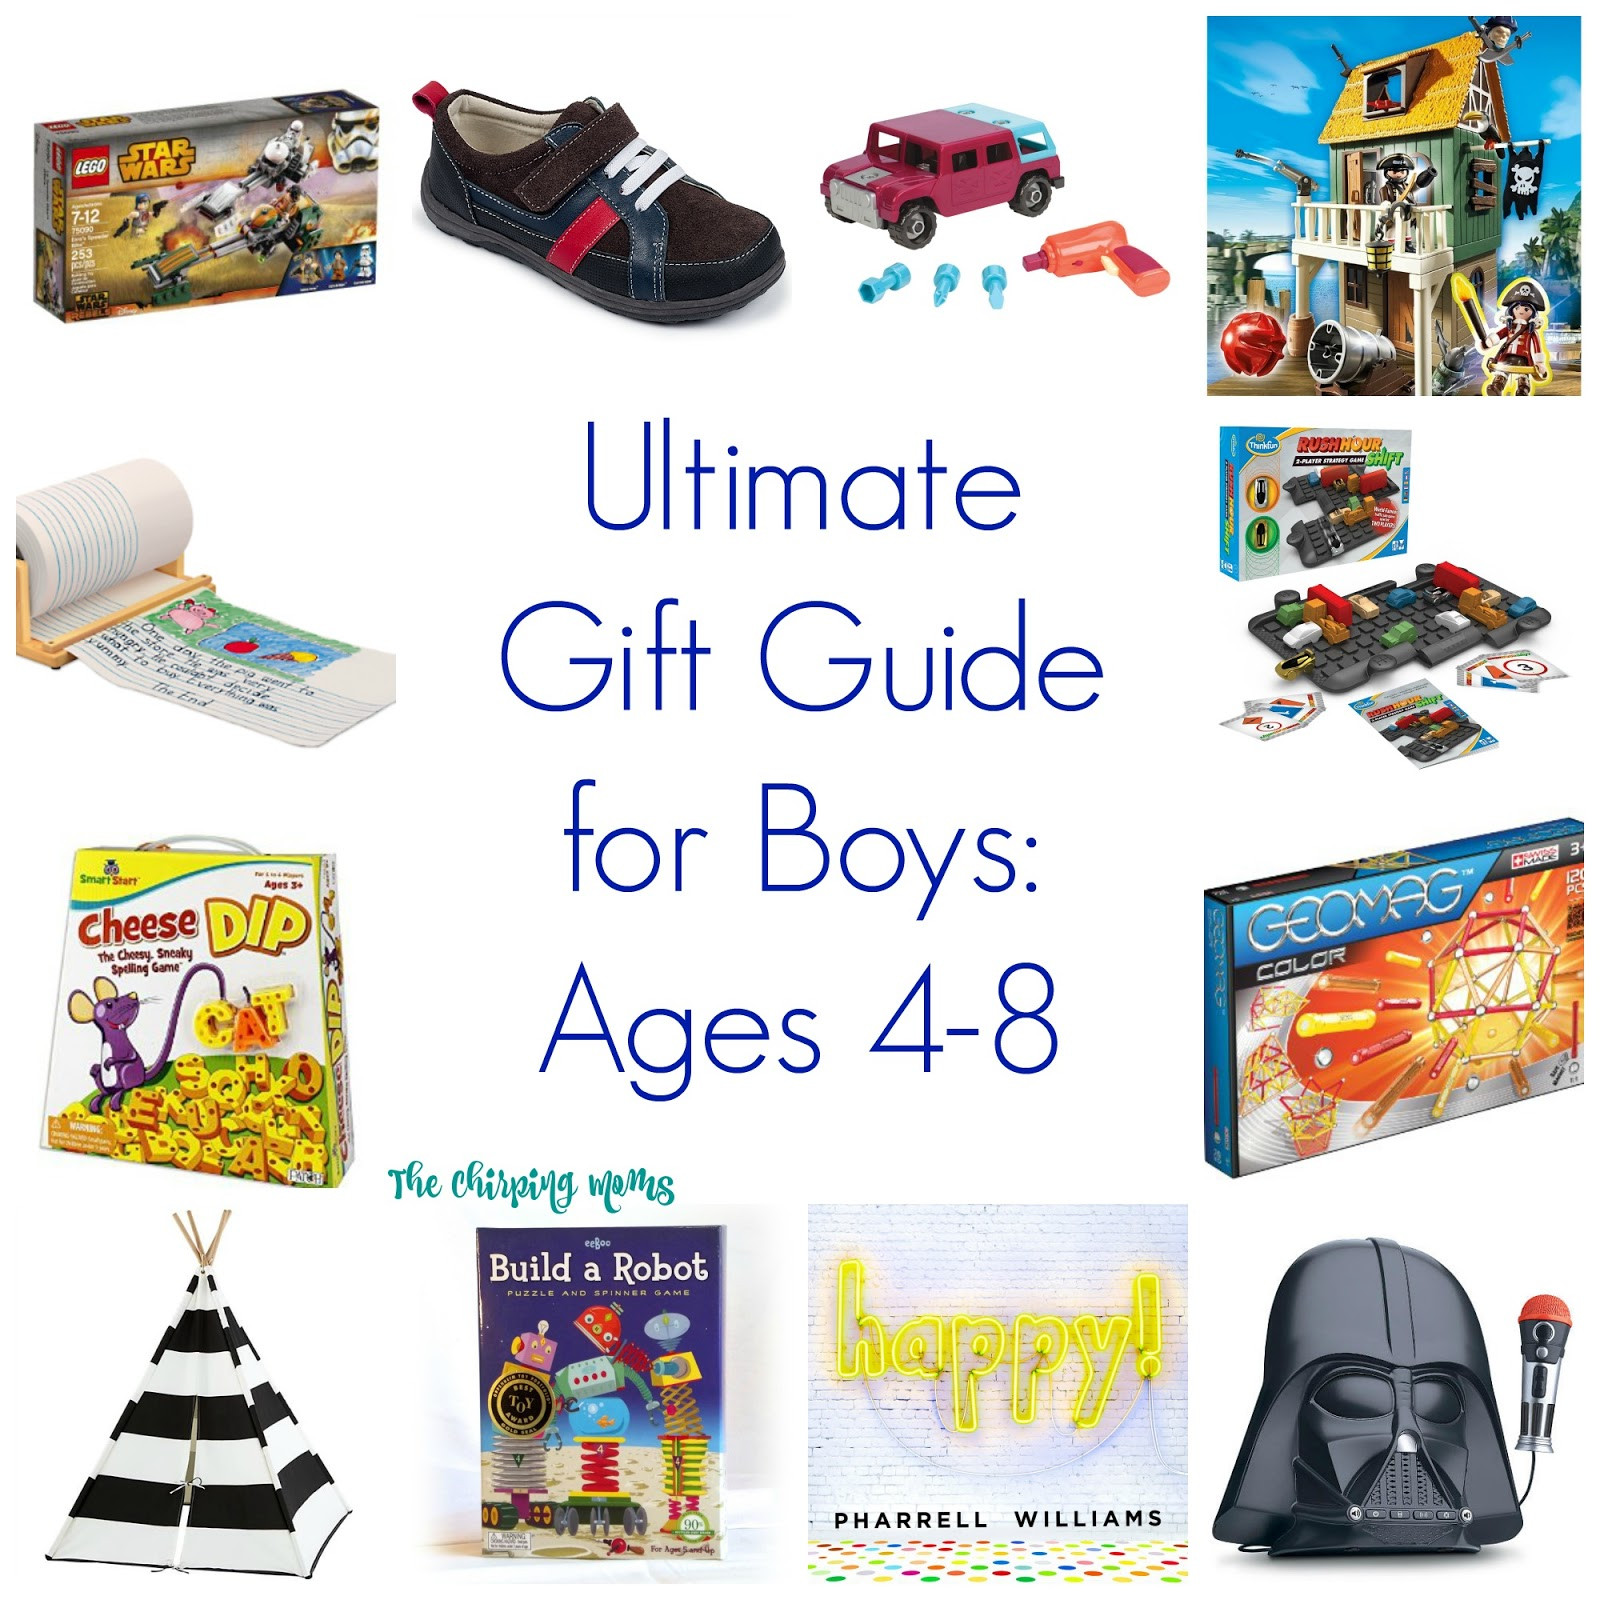 Gift Ideas For Boys Age 8
 Ultimate Gift Guide for Boys Ages 4 8 The Chirping Moms